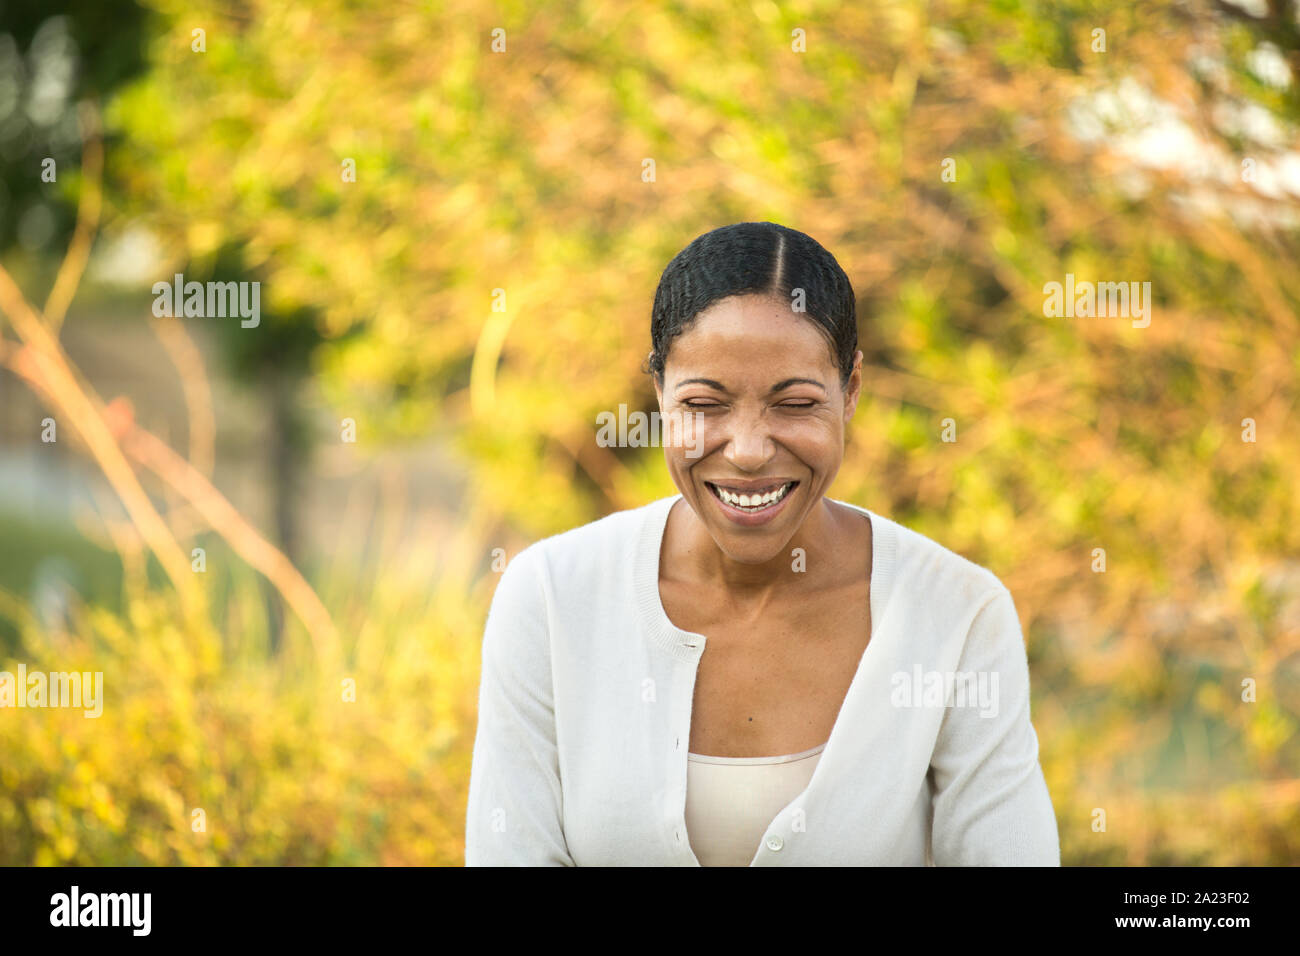 Mature confident African American woman smiling outside. Stock Photo